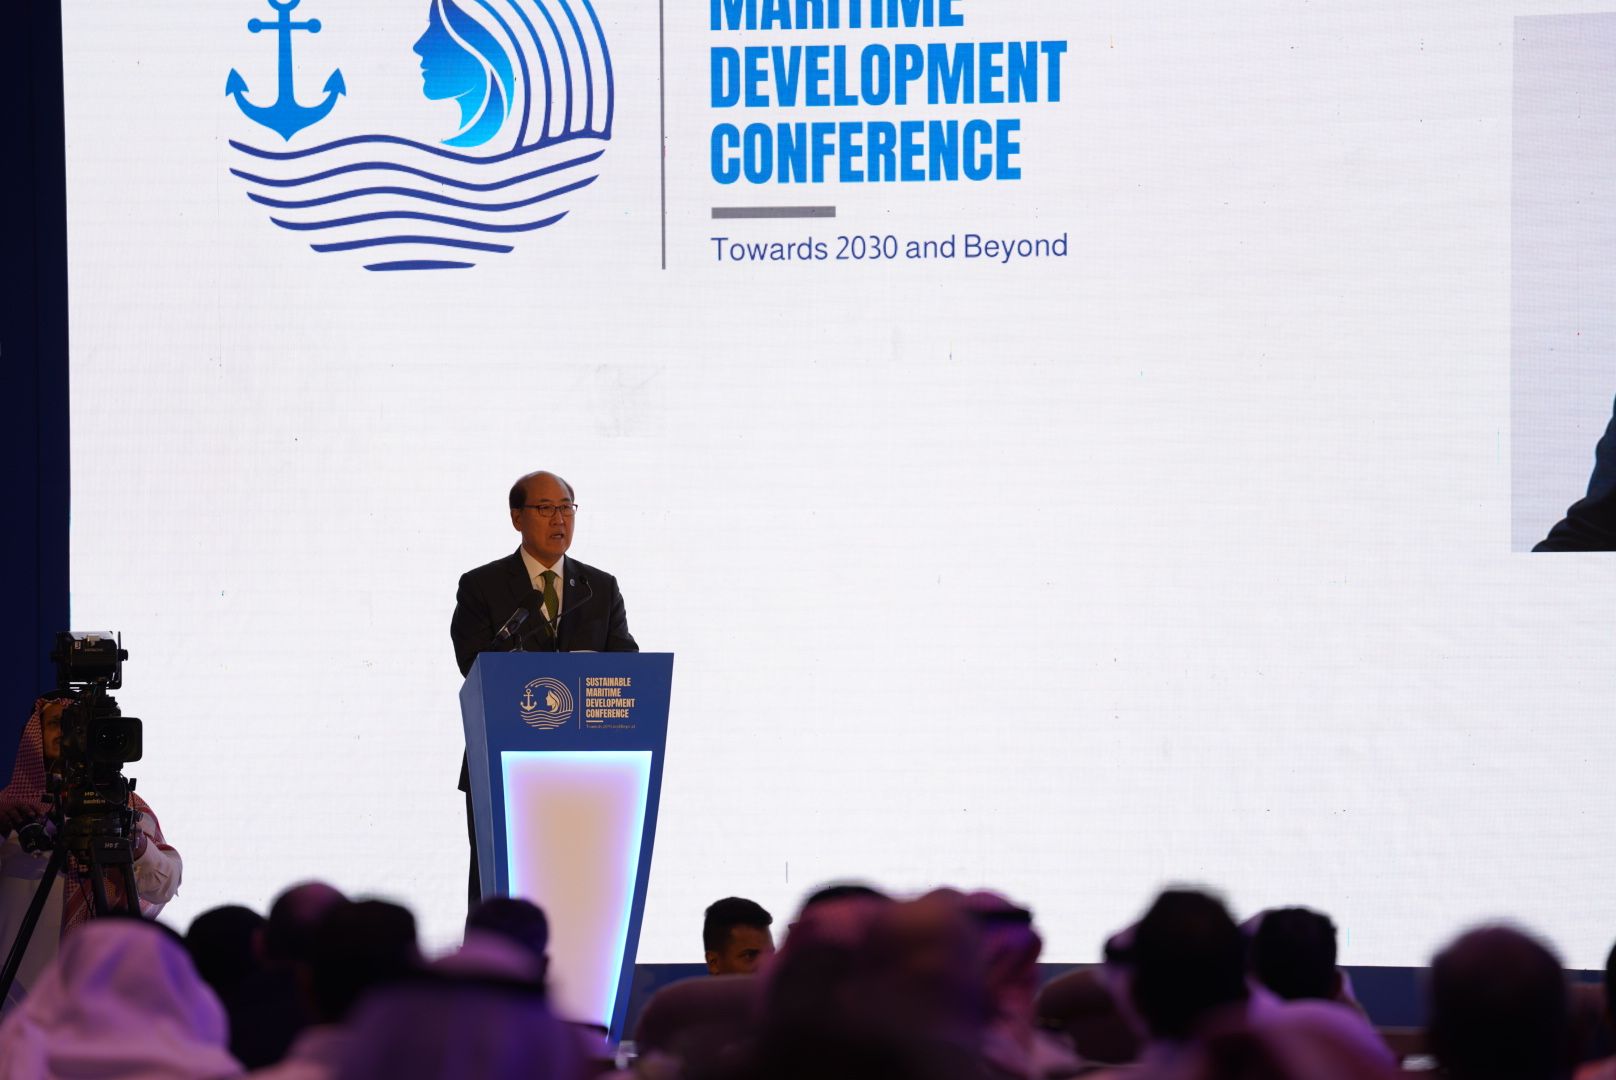 IMO Secretary General Kitack Lim speaking at the opening ceremony of the Sustainable Marine Development Towards 2030 and Beyond conference in Jeddah, KSA, on October 5, 2019.